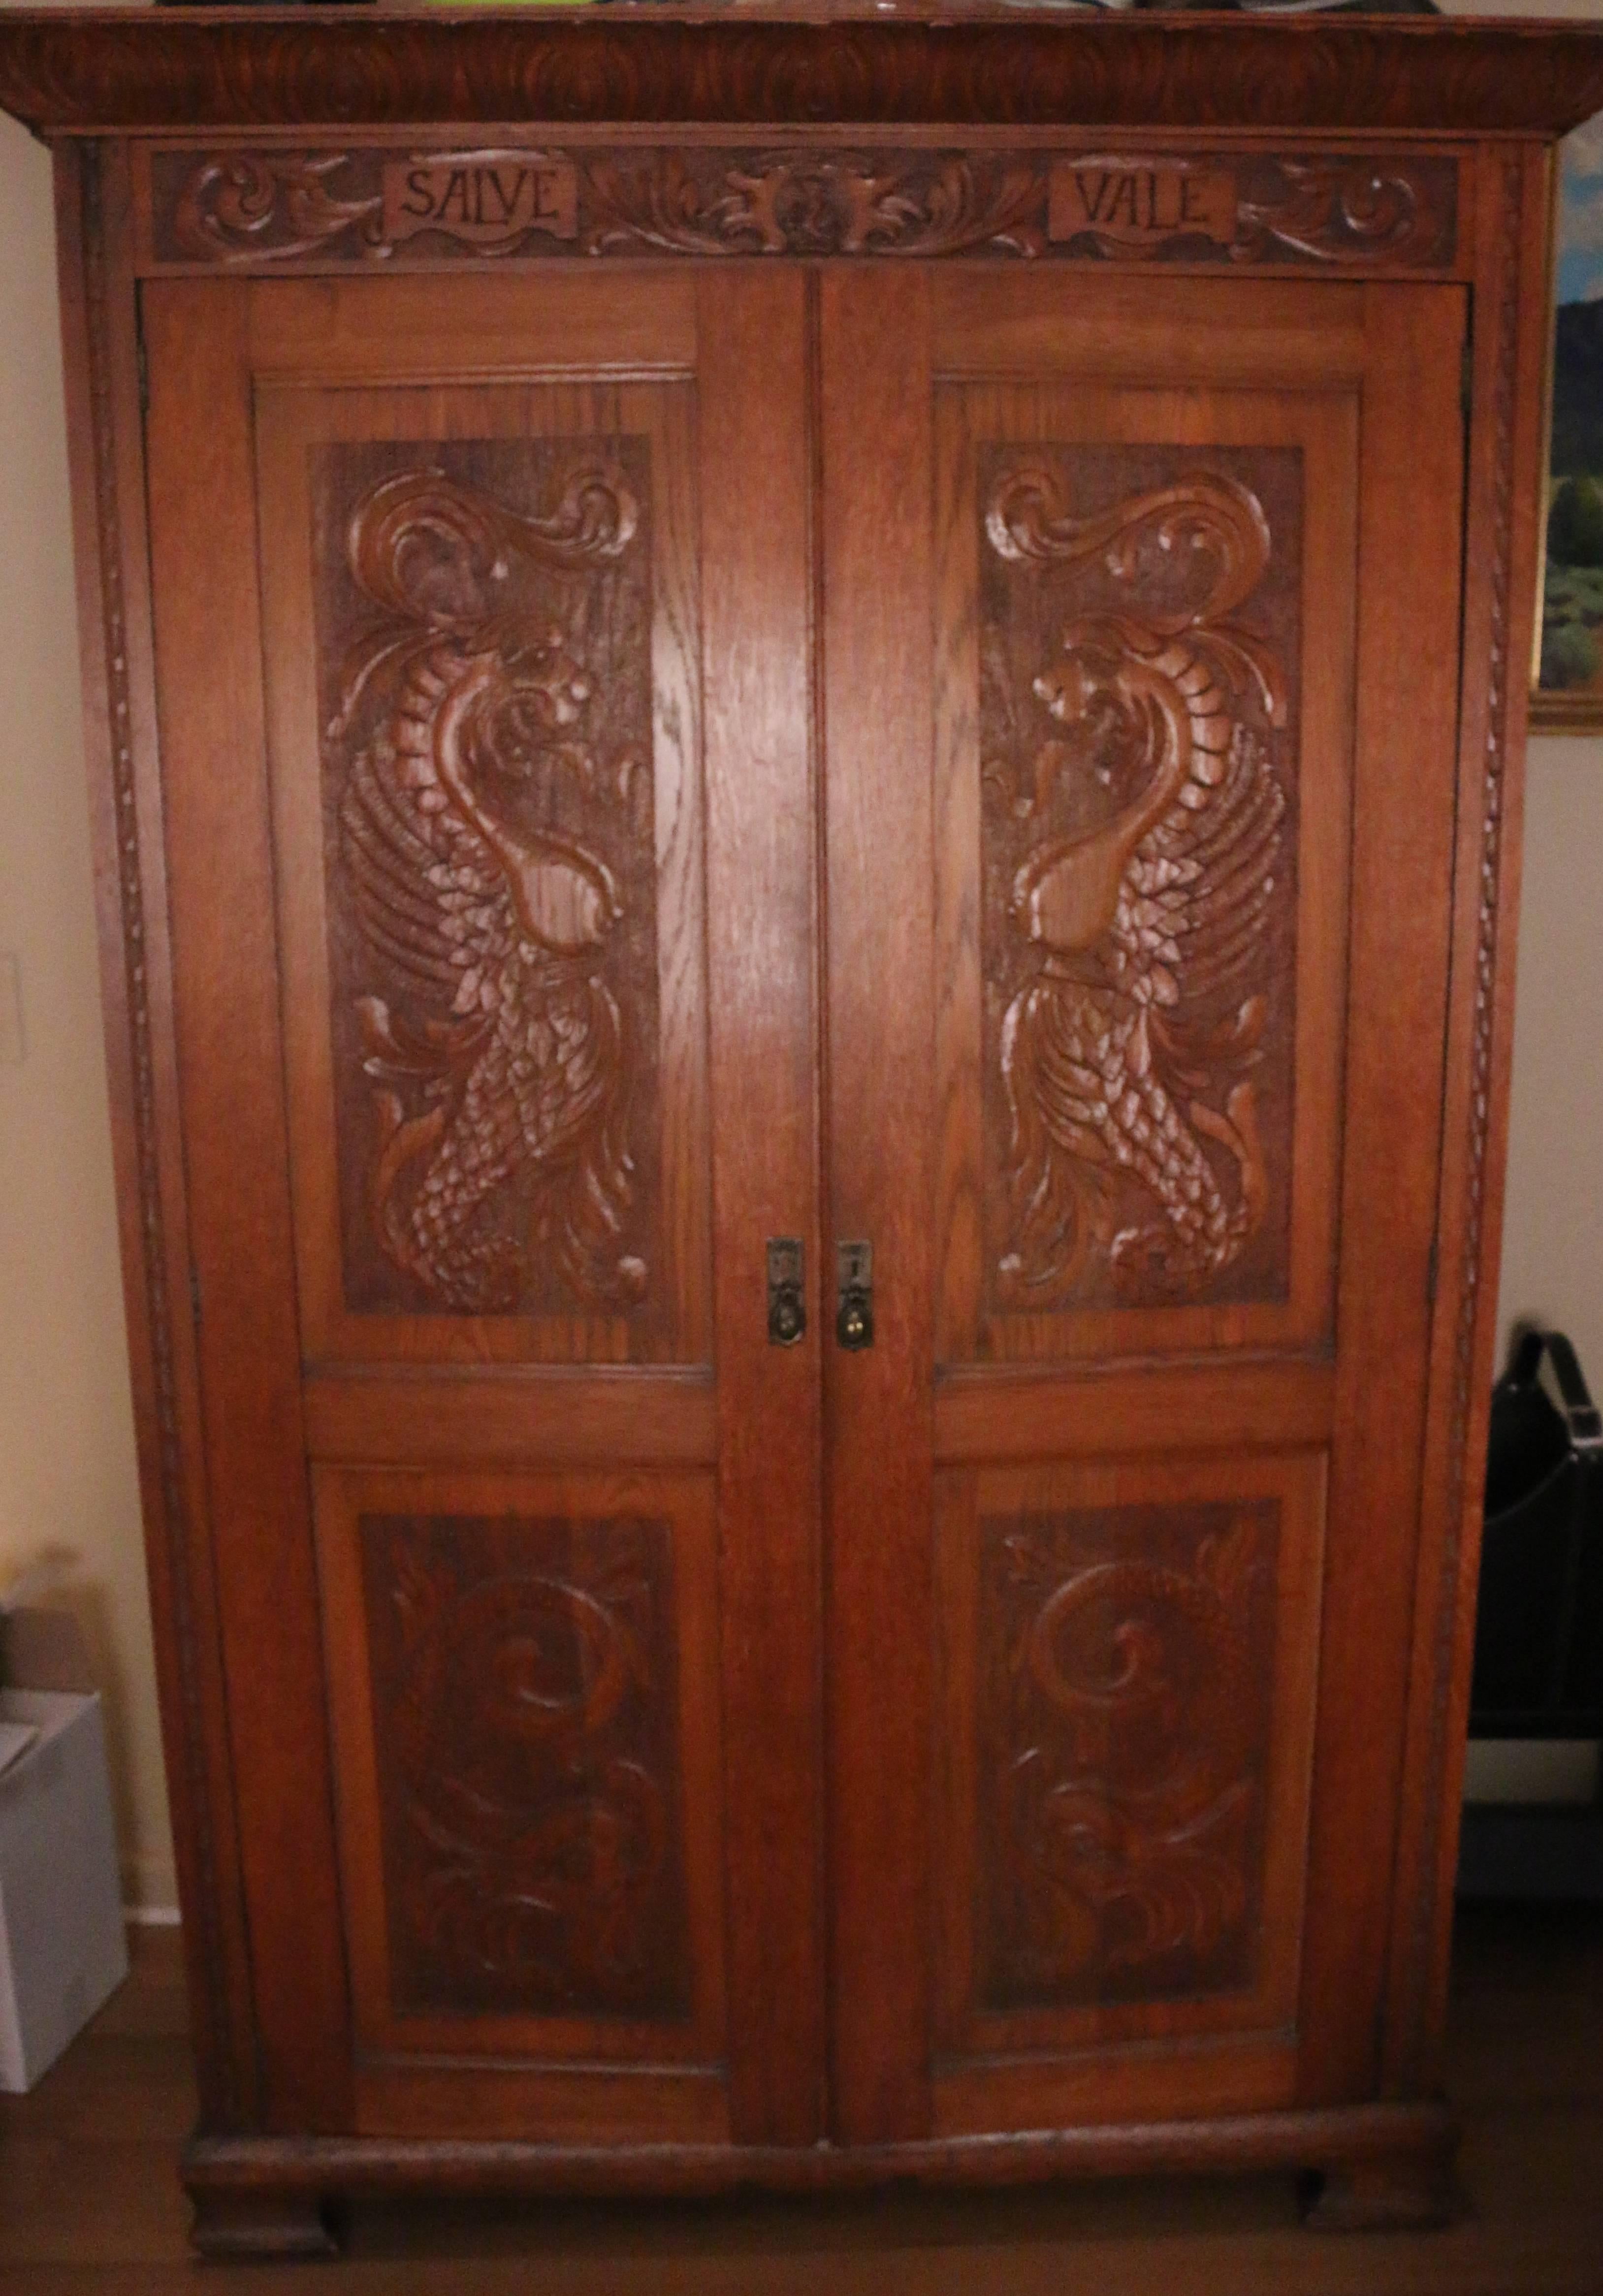 Scottish Light Oak Carved Scottish Armoire...finely carved details.
“Good fortune goes to the bold”- Audaces Fortuna Juve is written in Latin in the carved crest at the top of the armoire which is a Scottish crest.
Superb carvings on top and bottom